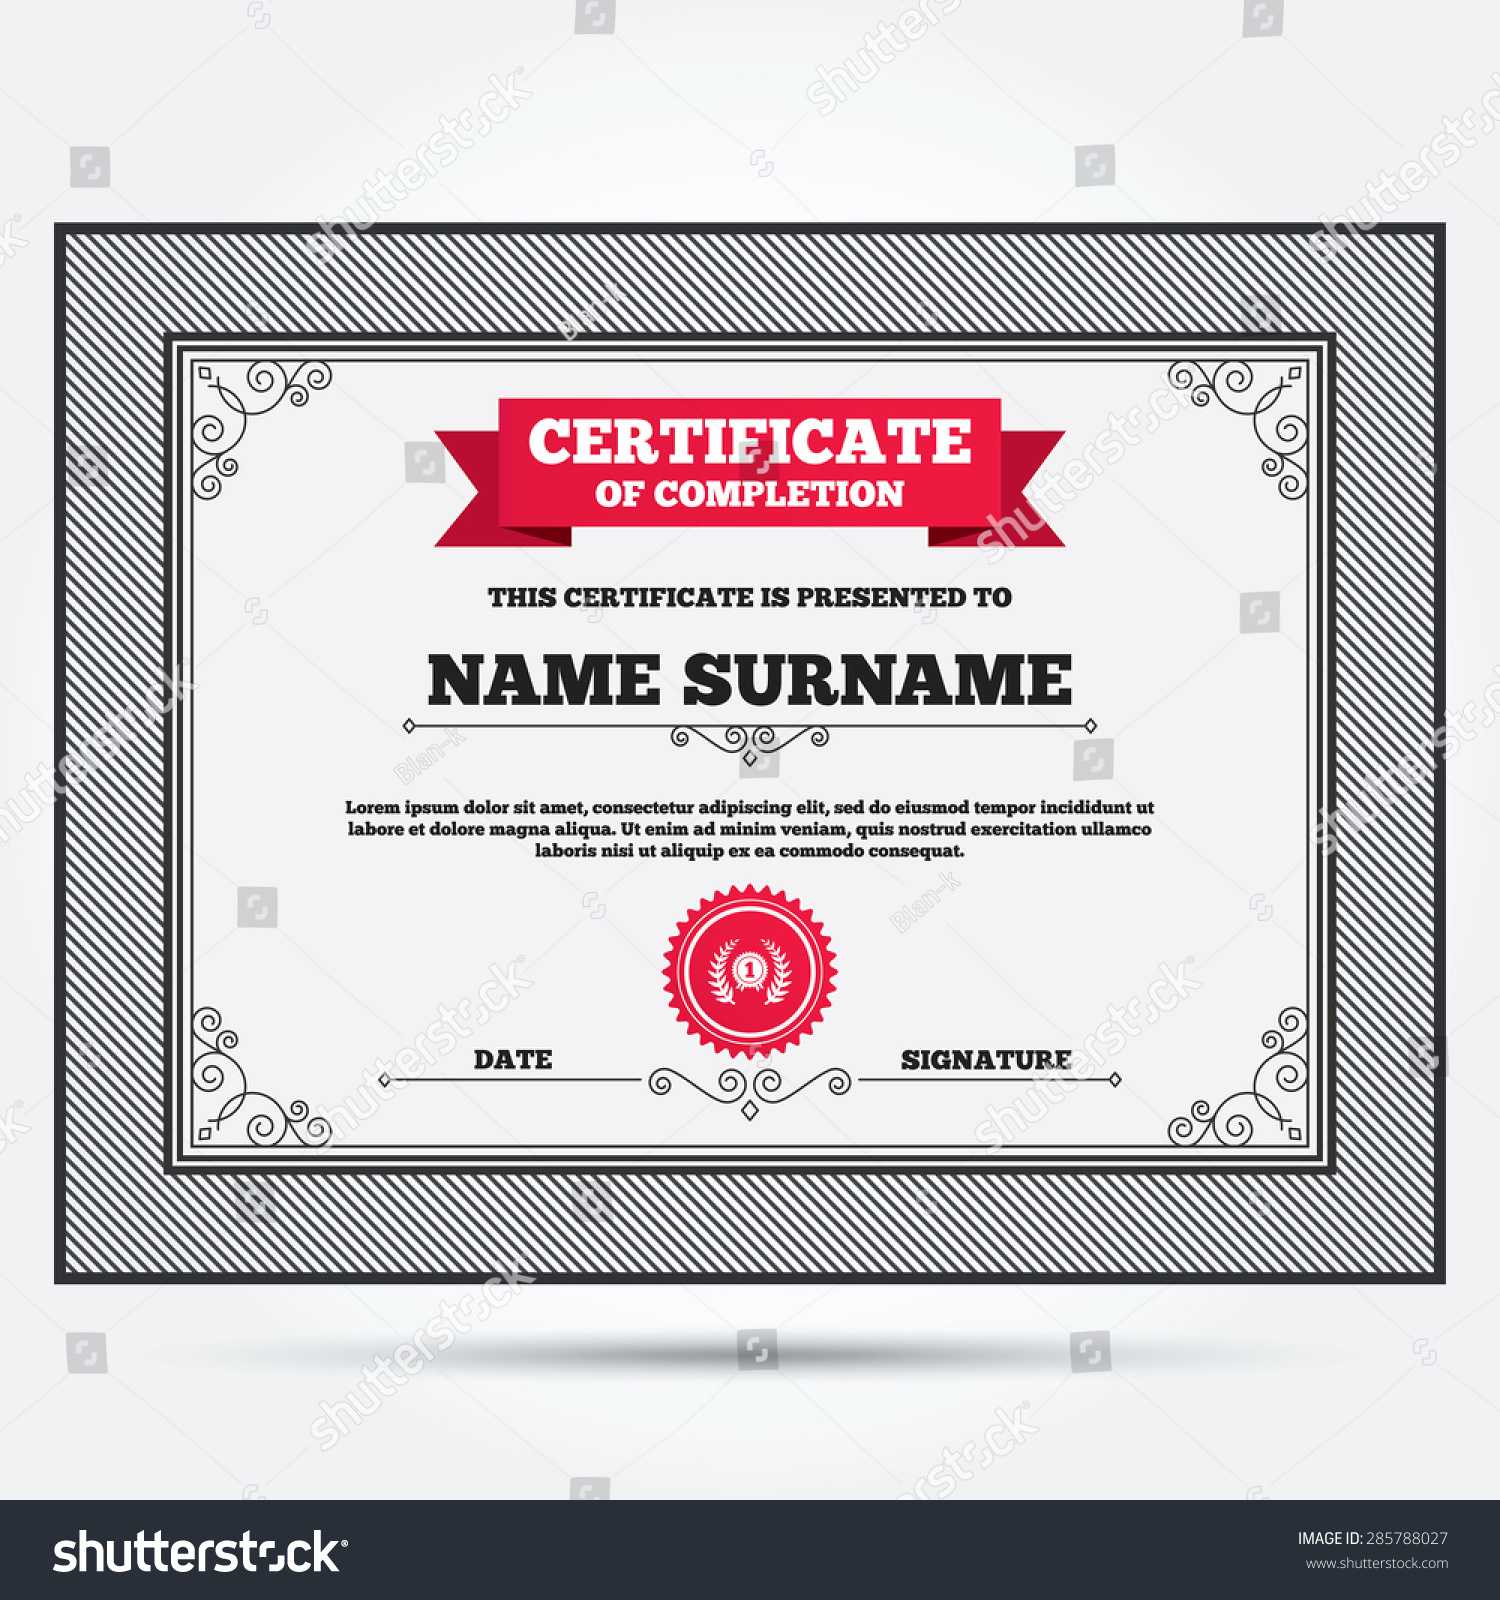 Certificate Completion First Place Award Sign | Royalty Free Throughout First Place Certificate Template